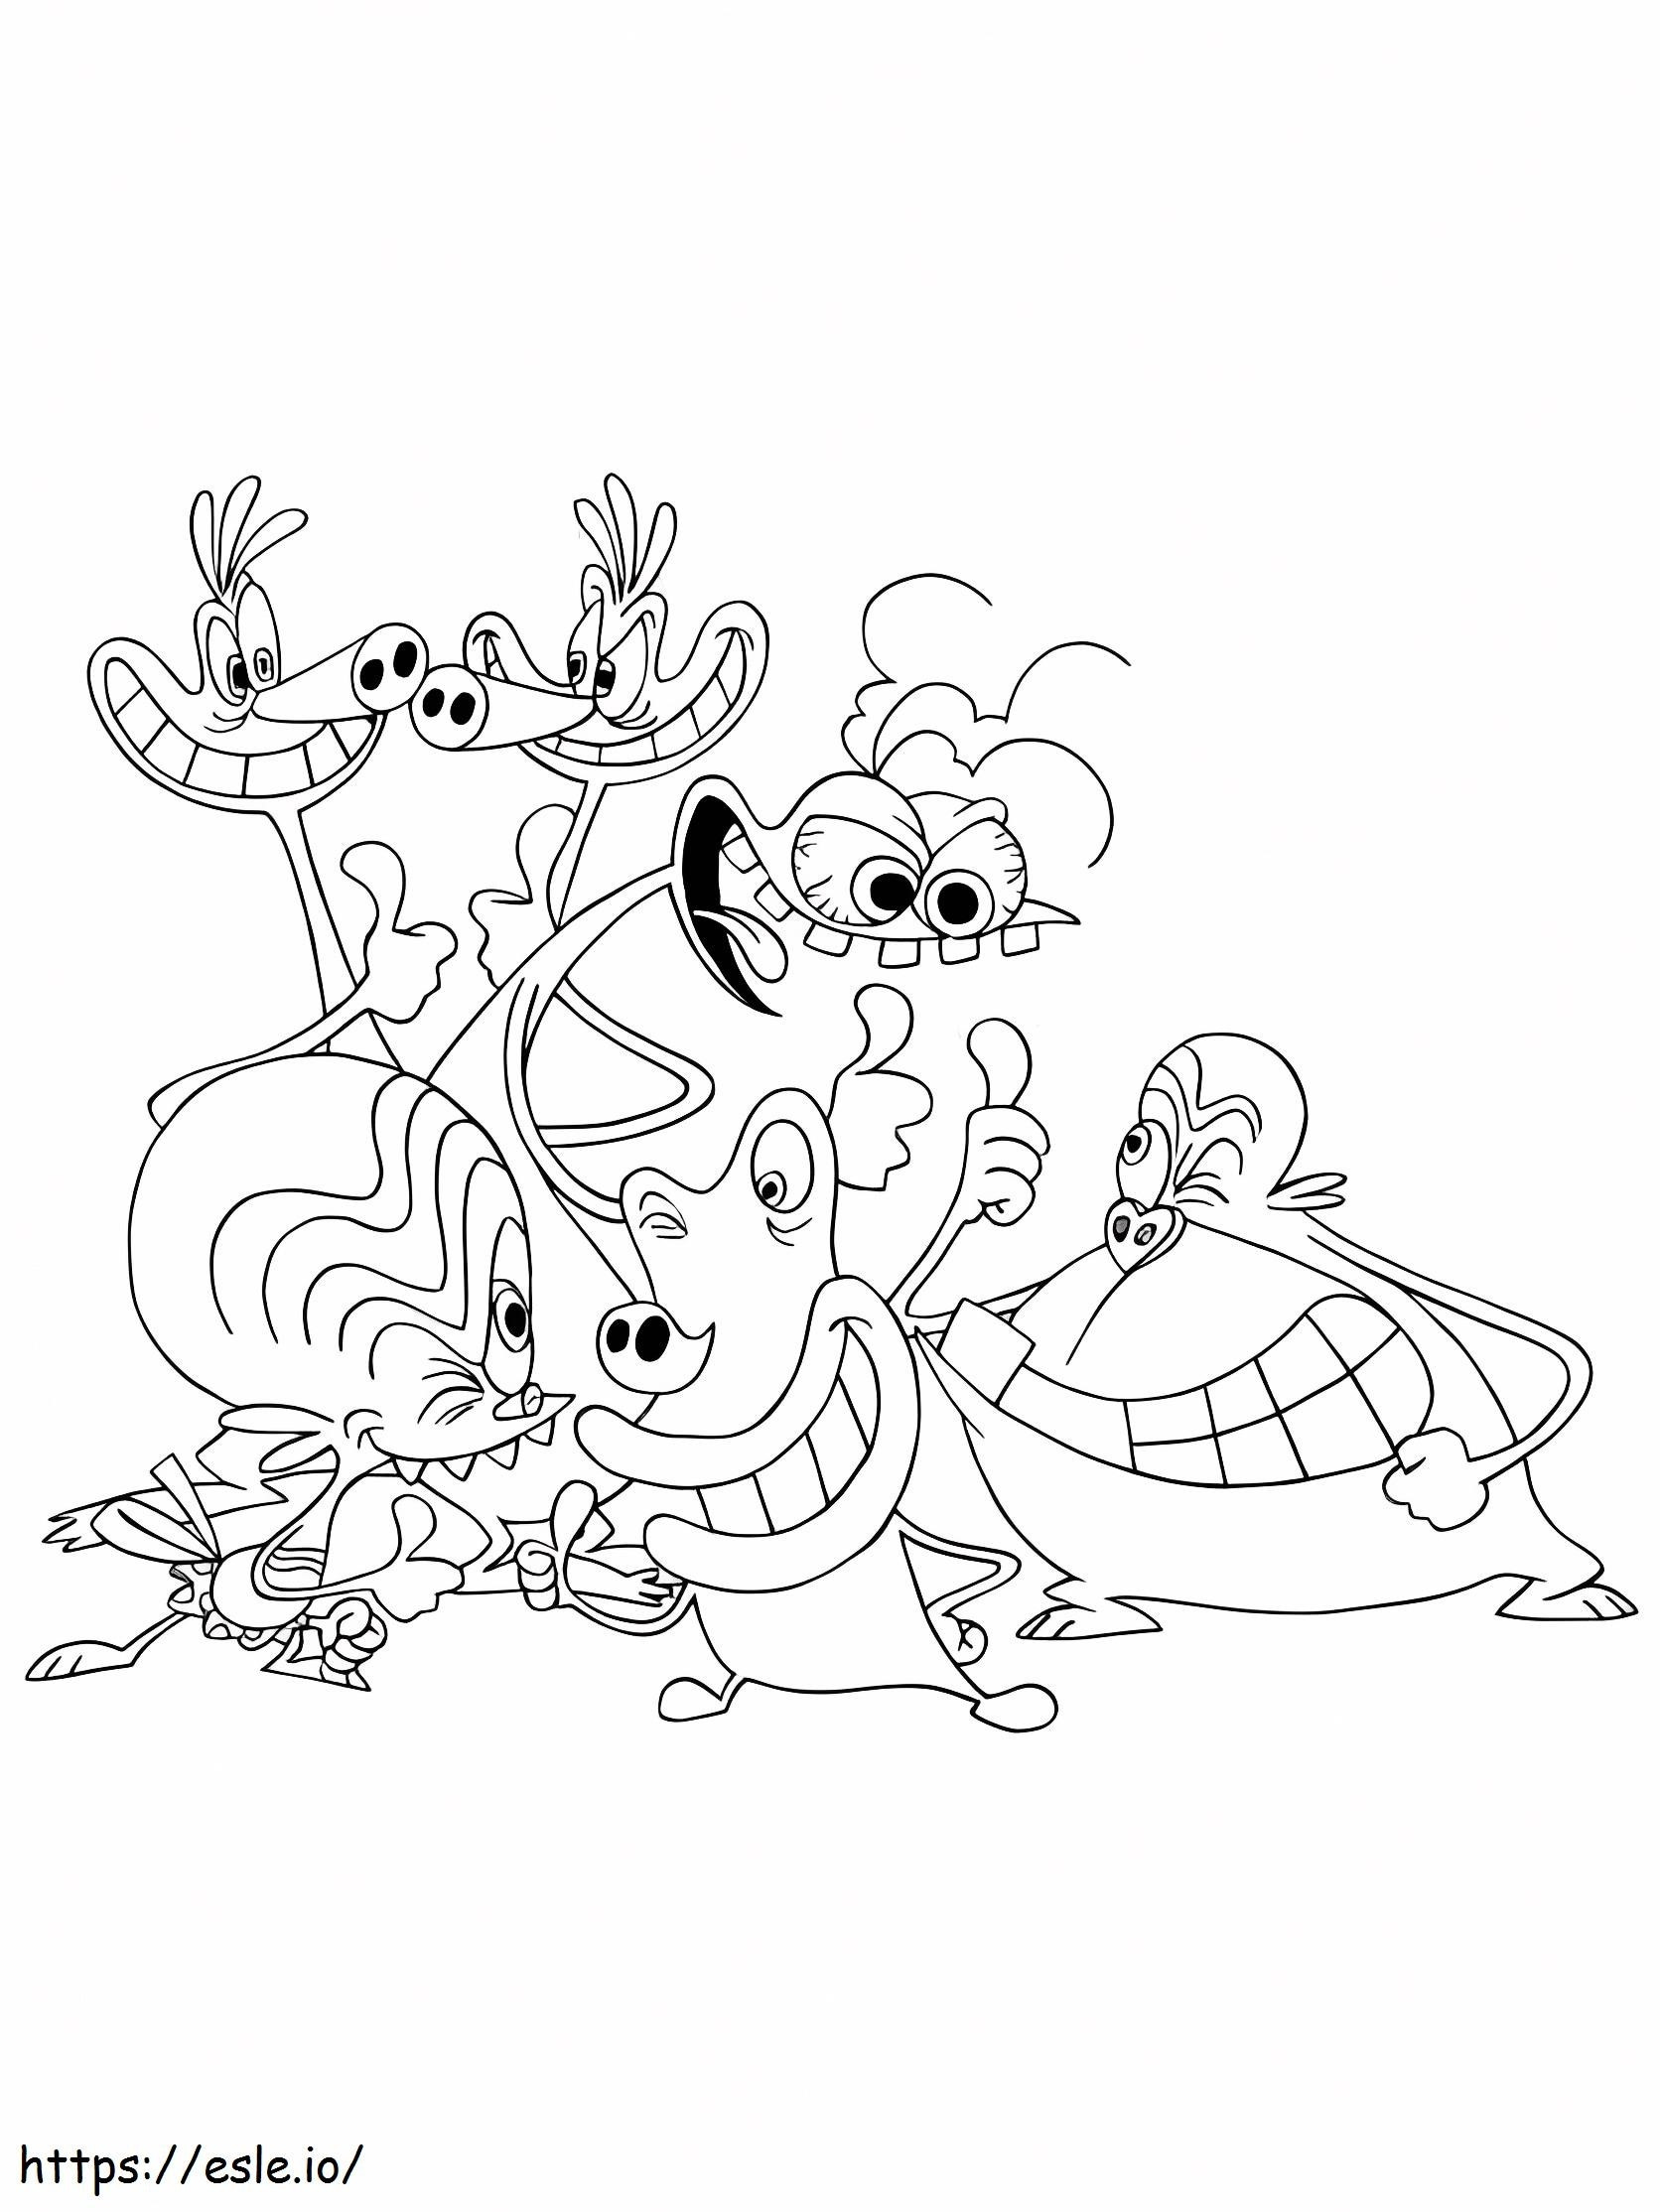 Happy Space Goofs coloring page